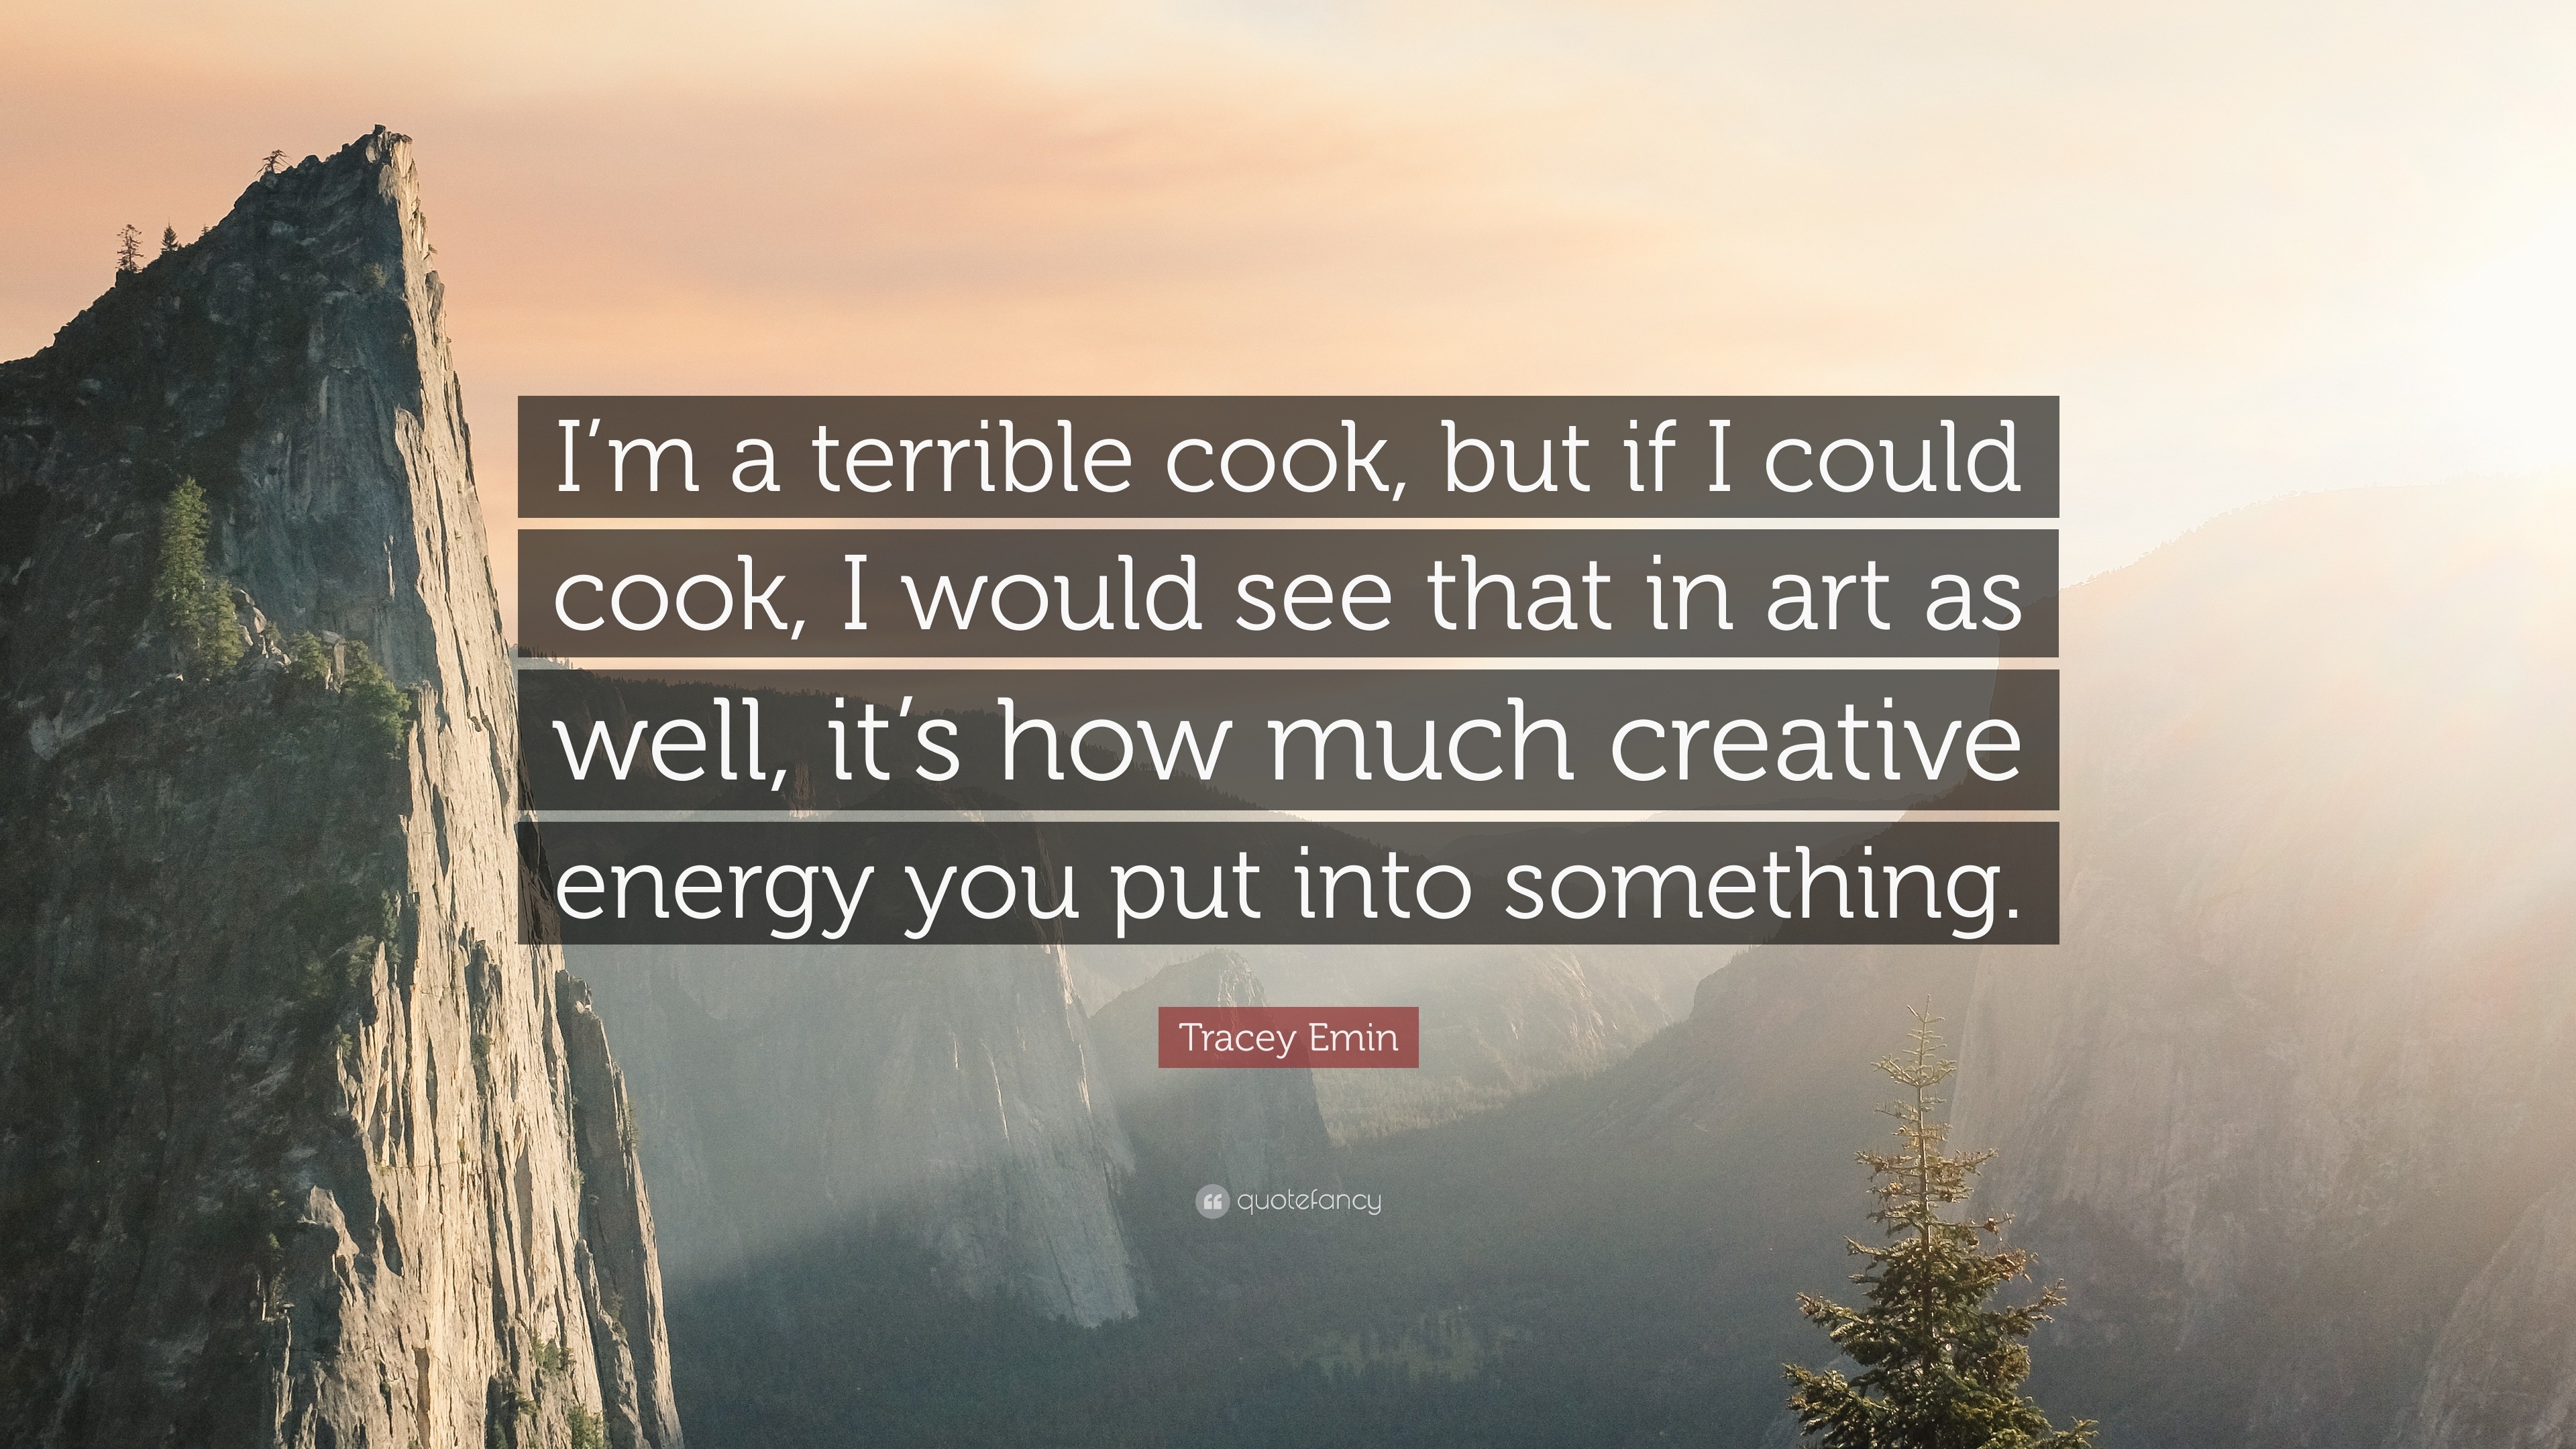 Tracey Emin Quote “I’m a terrible cook, but if I could cook, I would